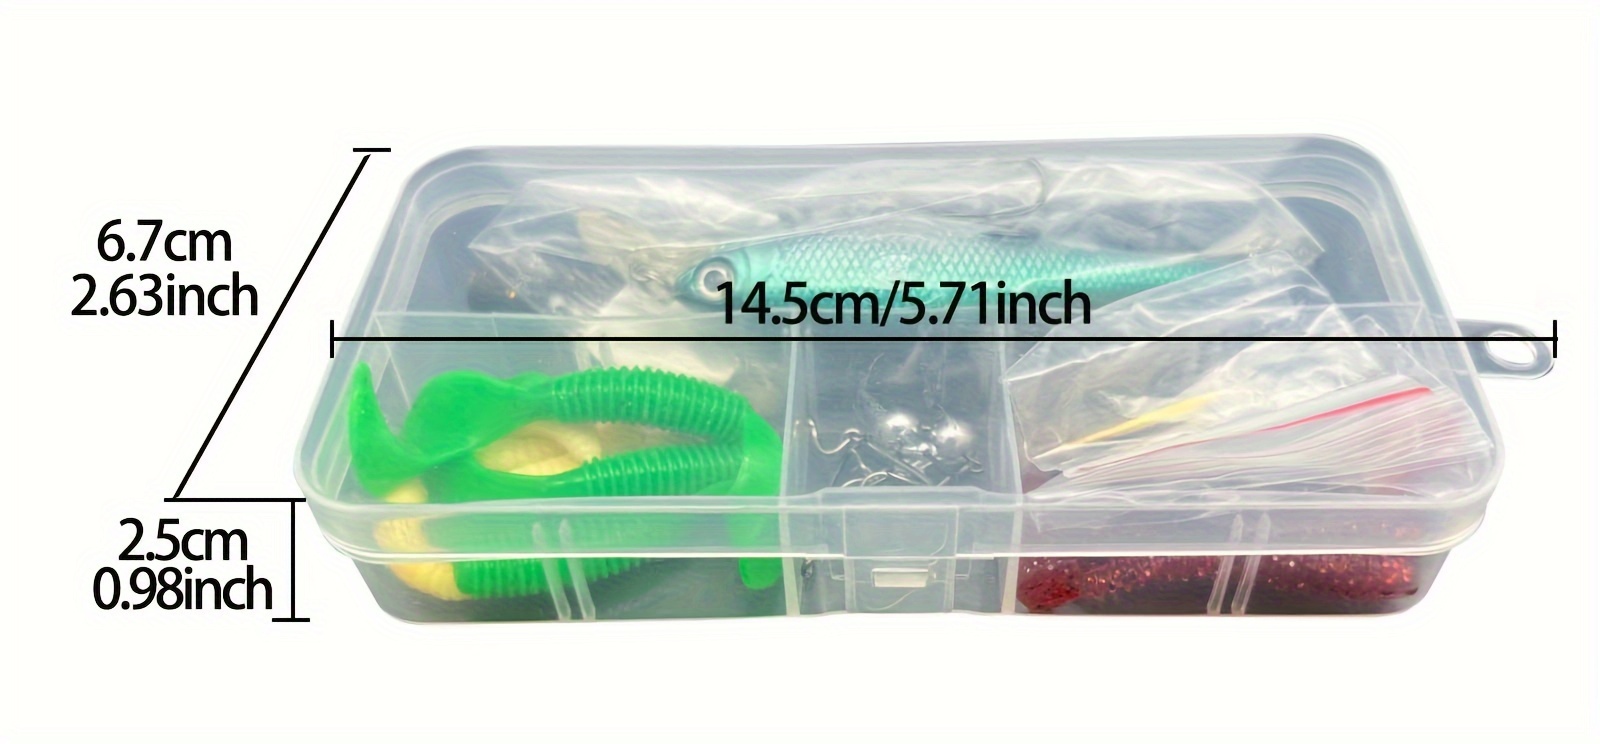 TCMBY 327PCS Fishing Lure Tackle Bait Kit Set for Freshwater Fishing Tackle  Box with Tackle Included Fishing Gear, Crankbait, Soft Worm, Spinner,  Spoon, Topwate… en 2024